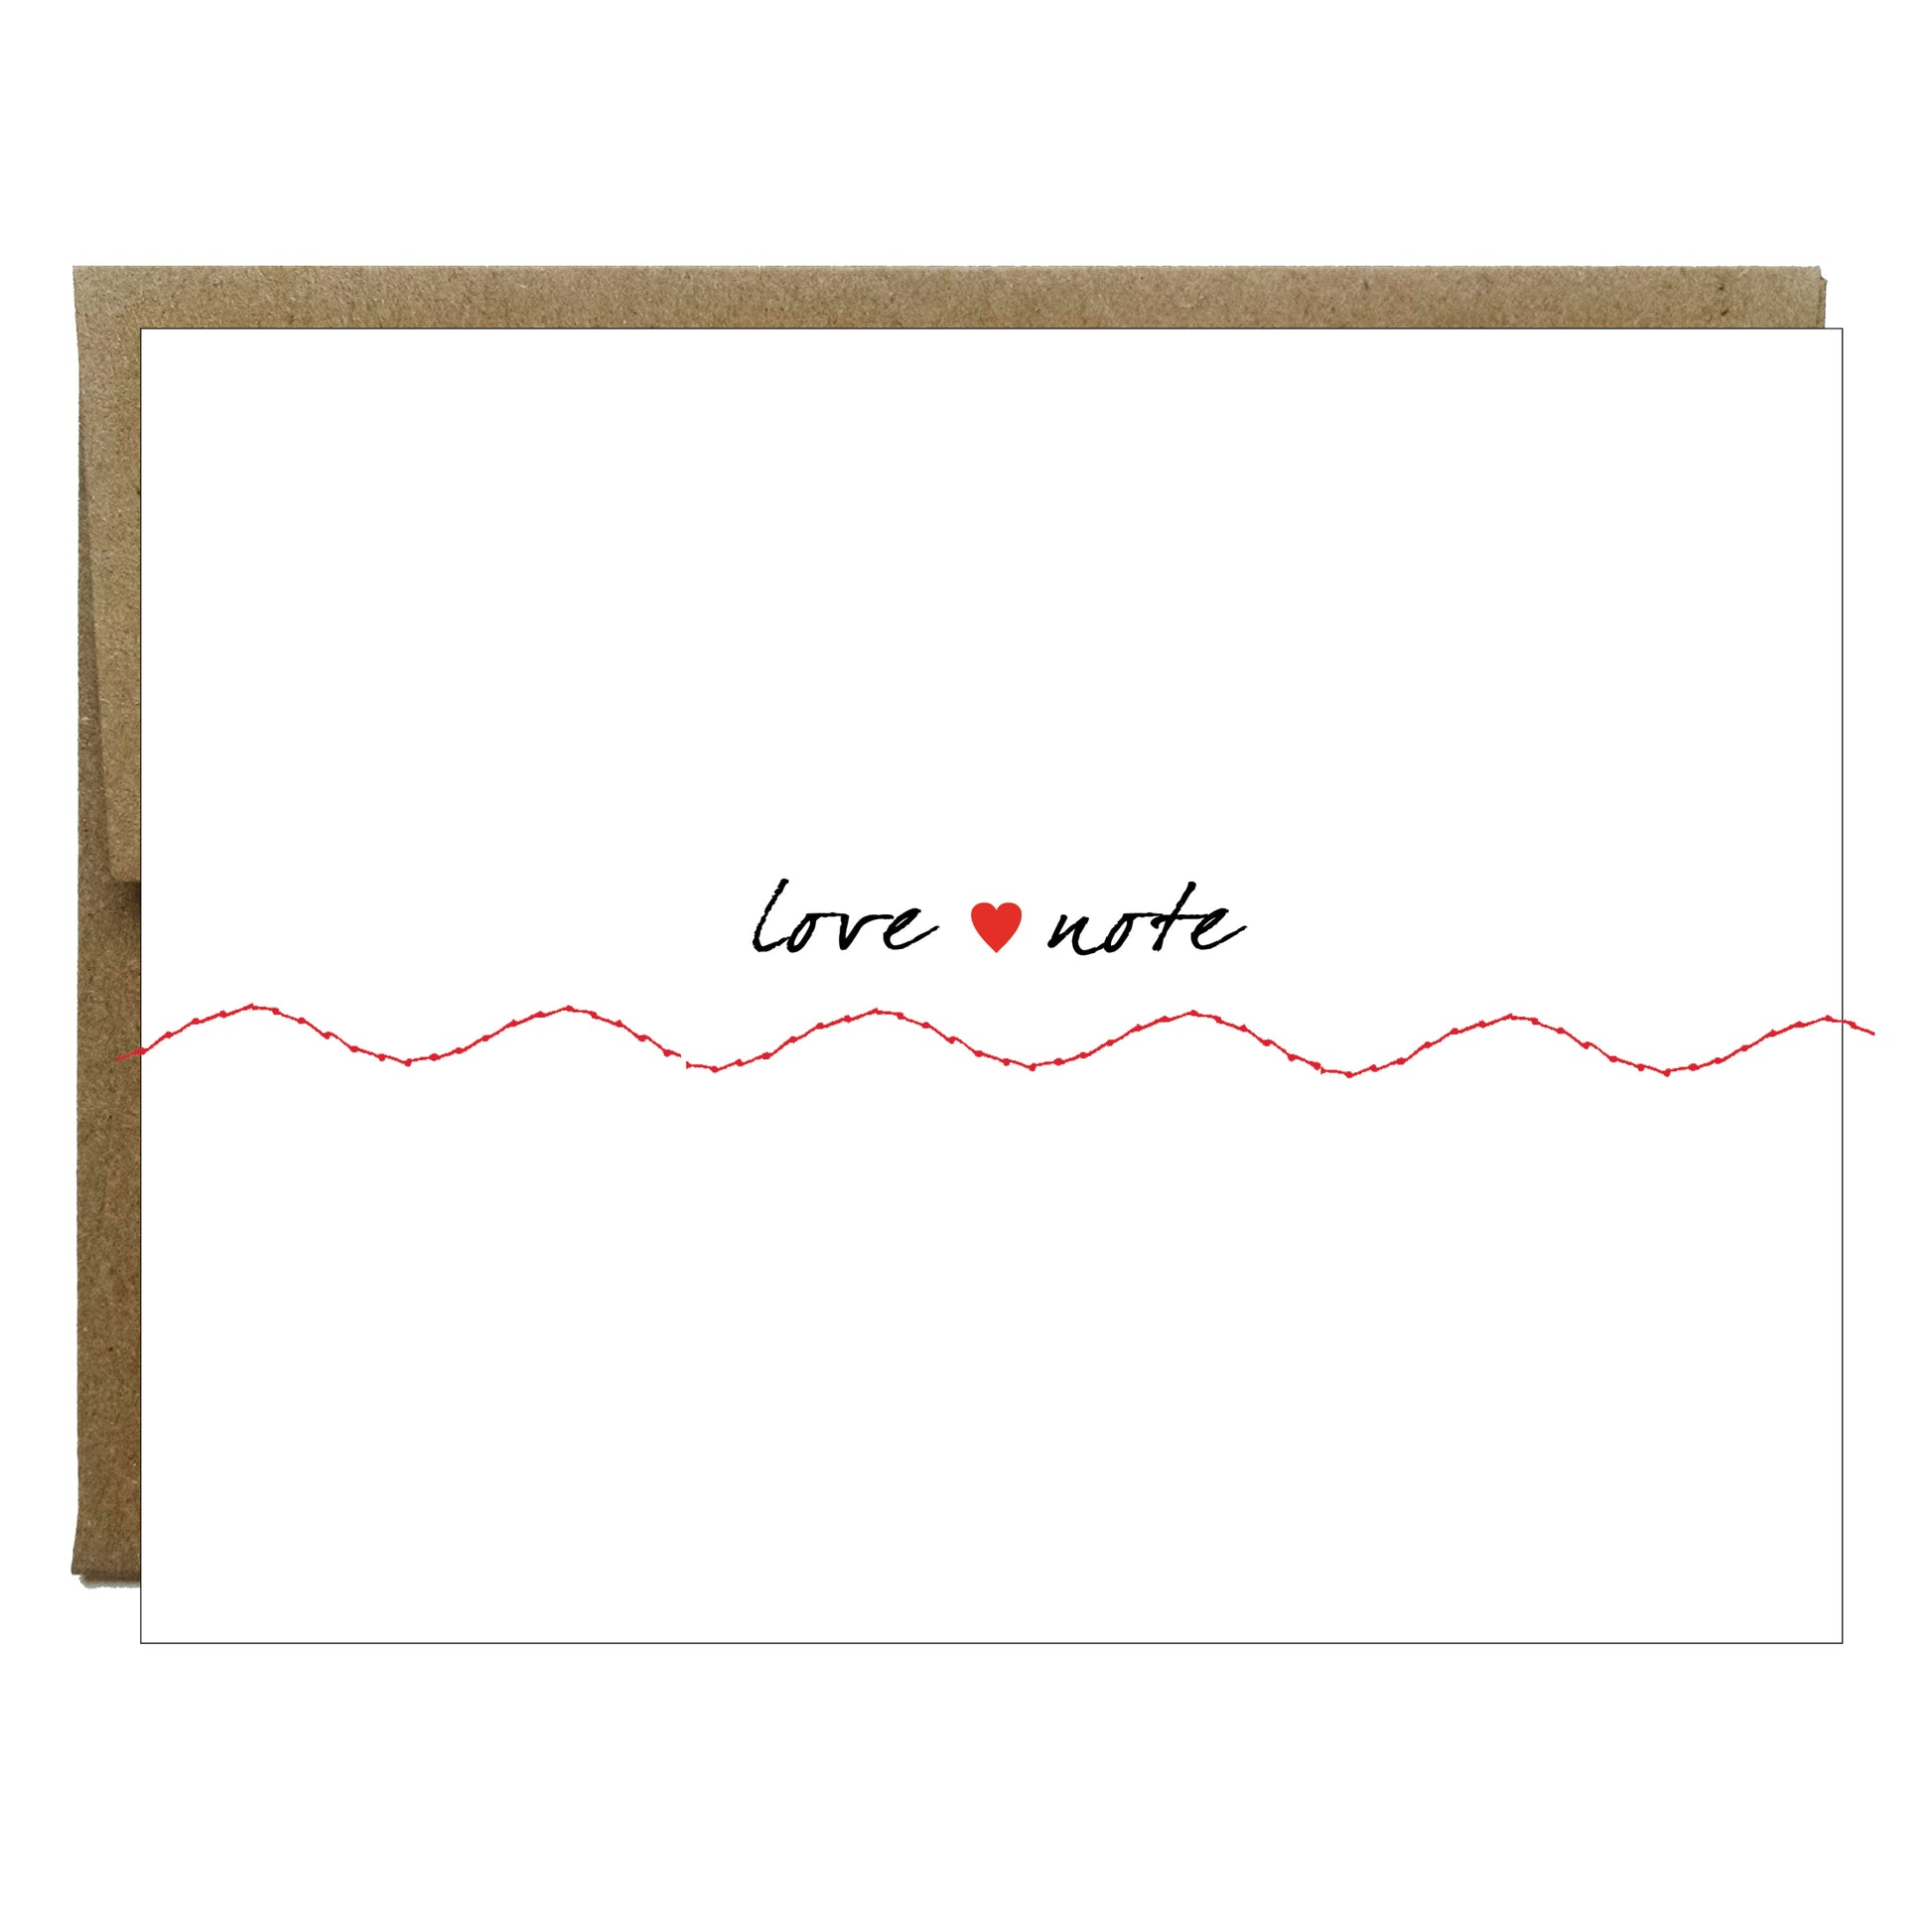 Love Note Sewn with Red Thread Greeting Card - Idea Chíc